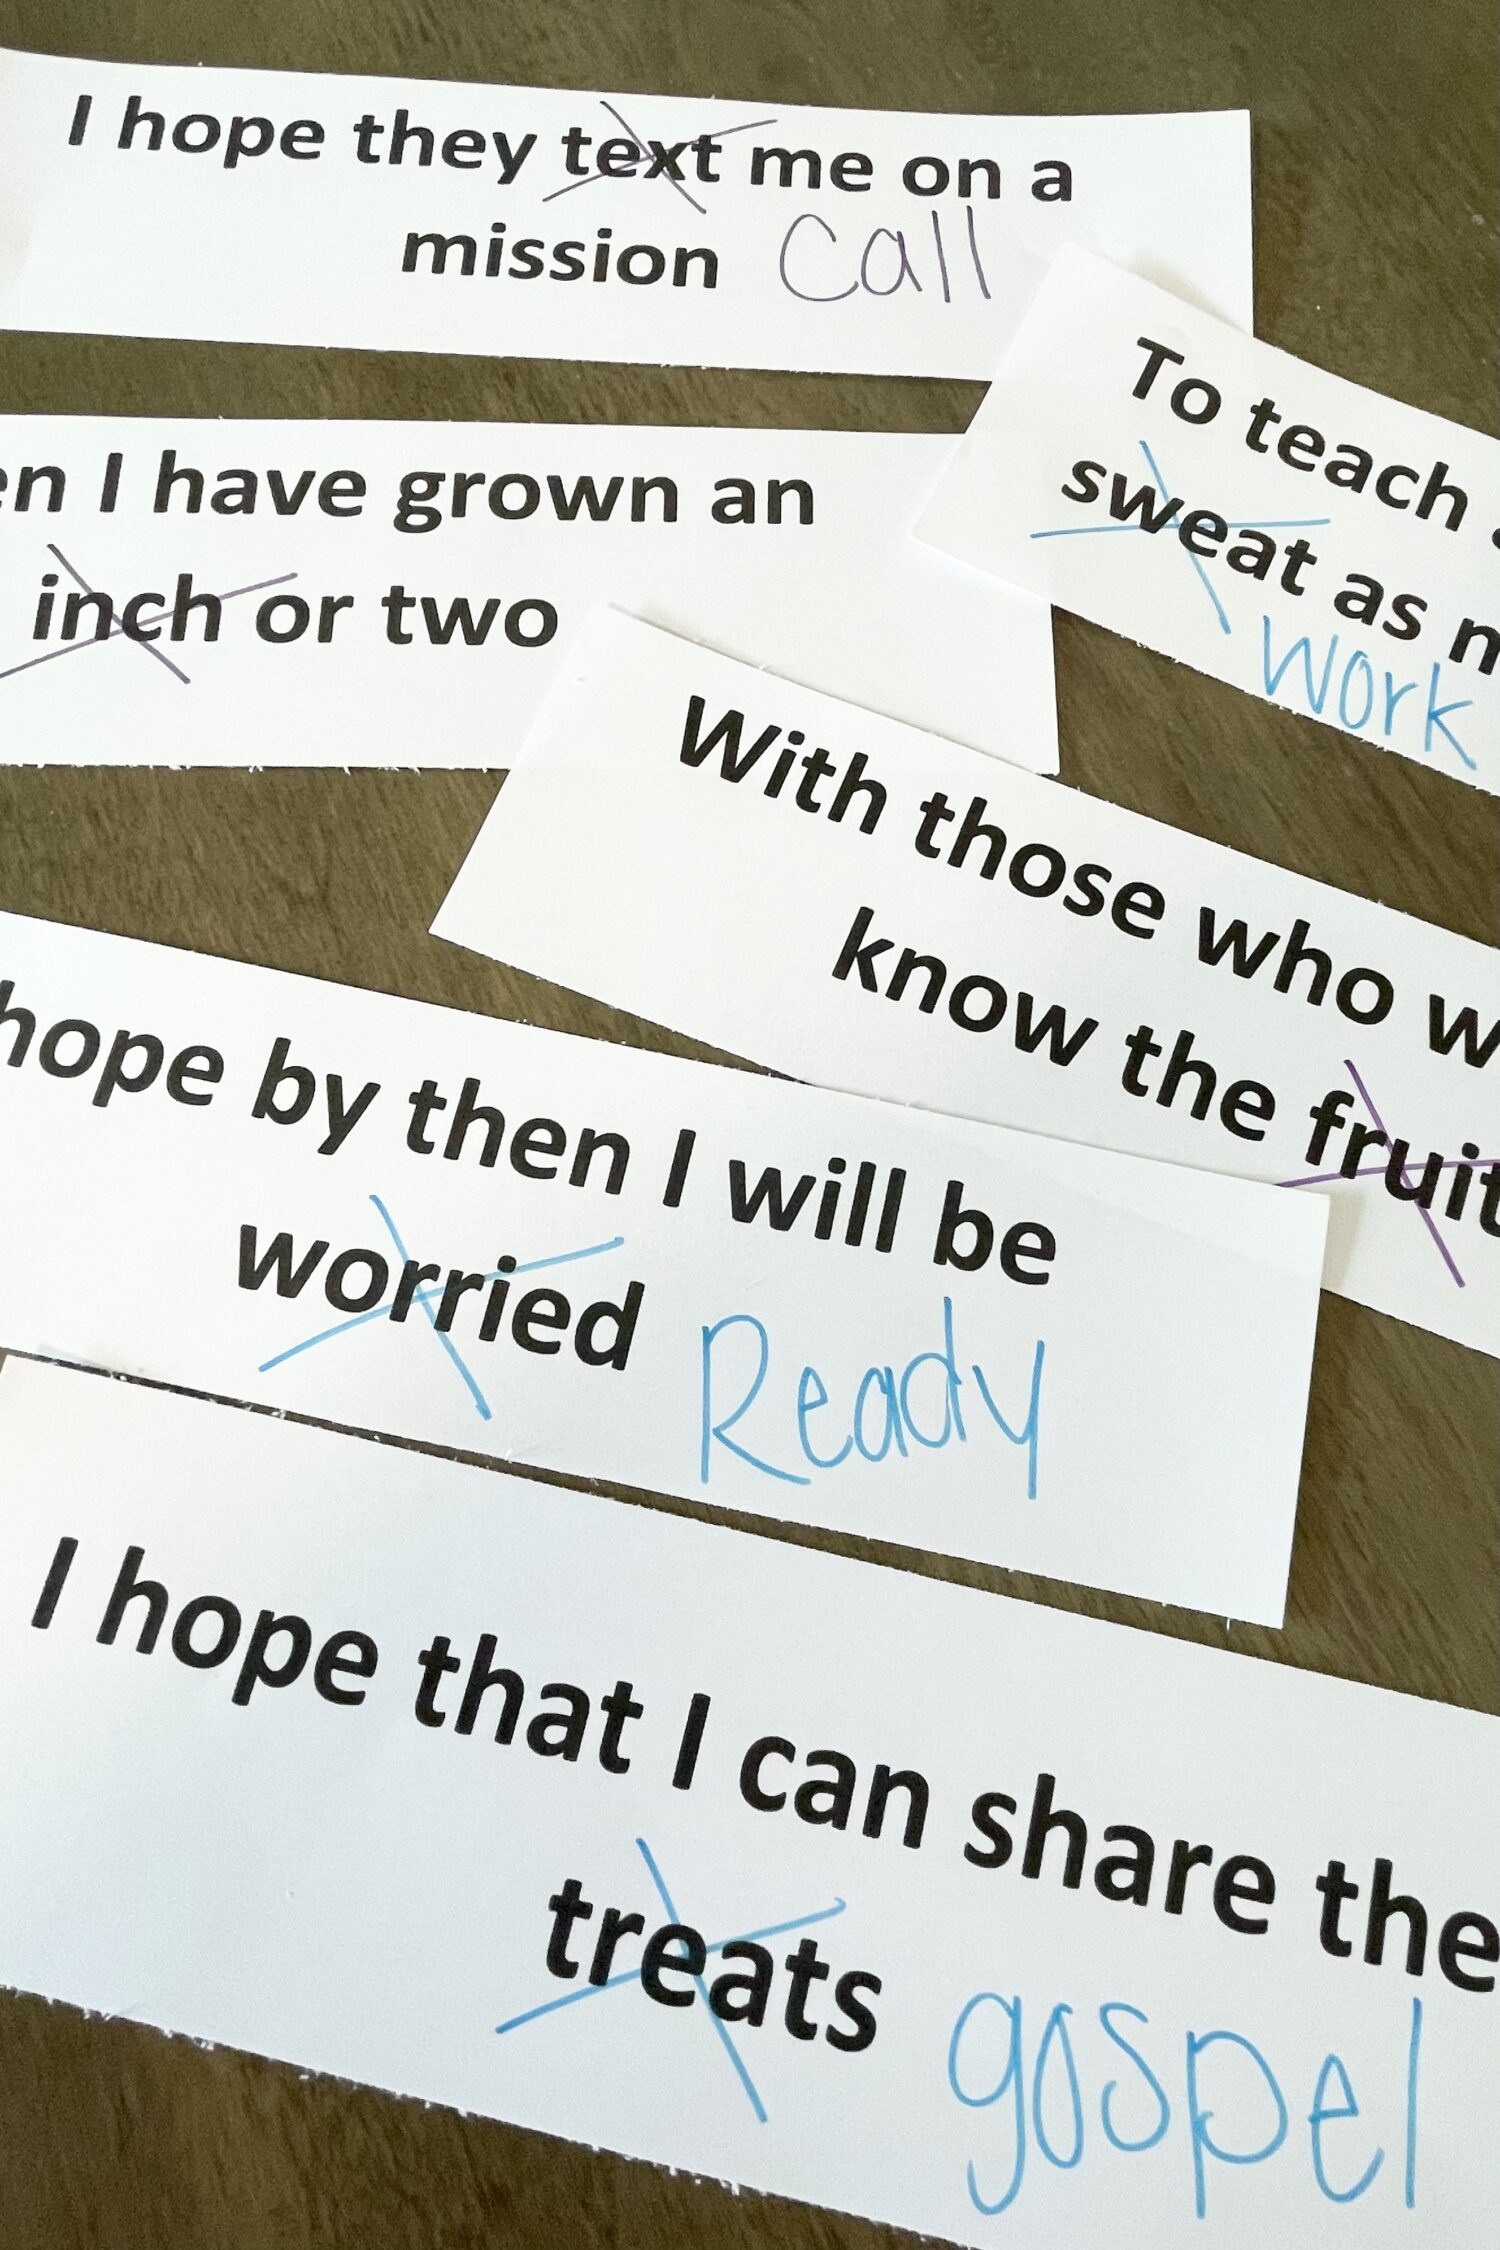 Use this Silly Word Swap activity to review I Hope They Call Me On a Mission in primary! Just swap out one of the song lyrics for a silly word and see if the kids can detect the word that doesn't quite fit! Or, switch it up and play as a MadLib! Easy singing time idea for LDS Primary Music Leaders with printable song helps. 